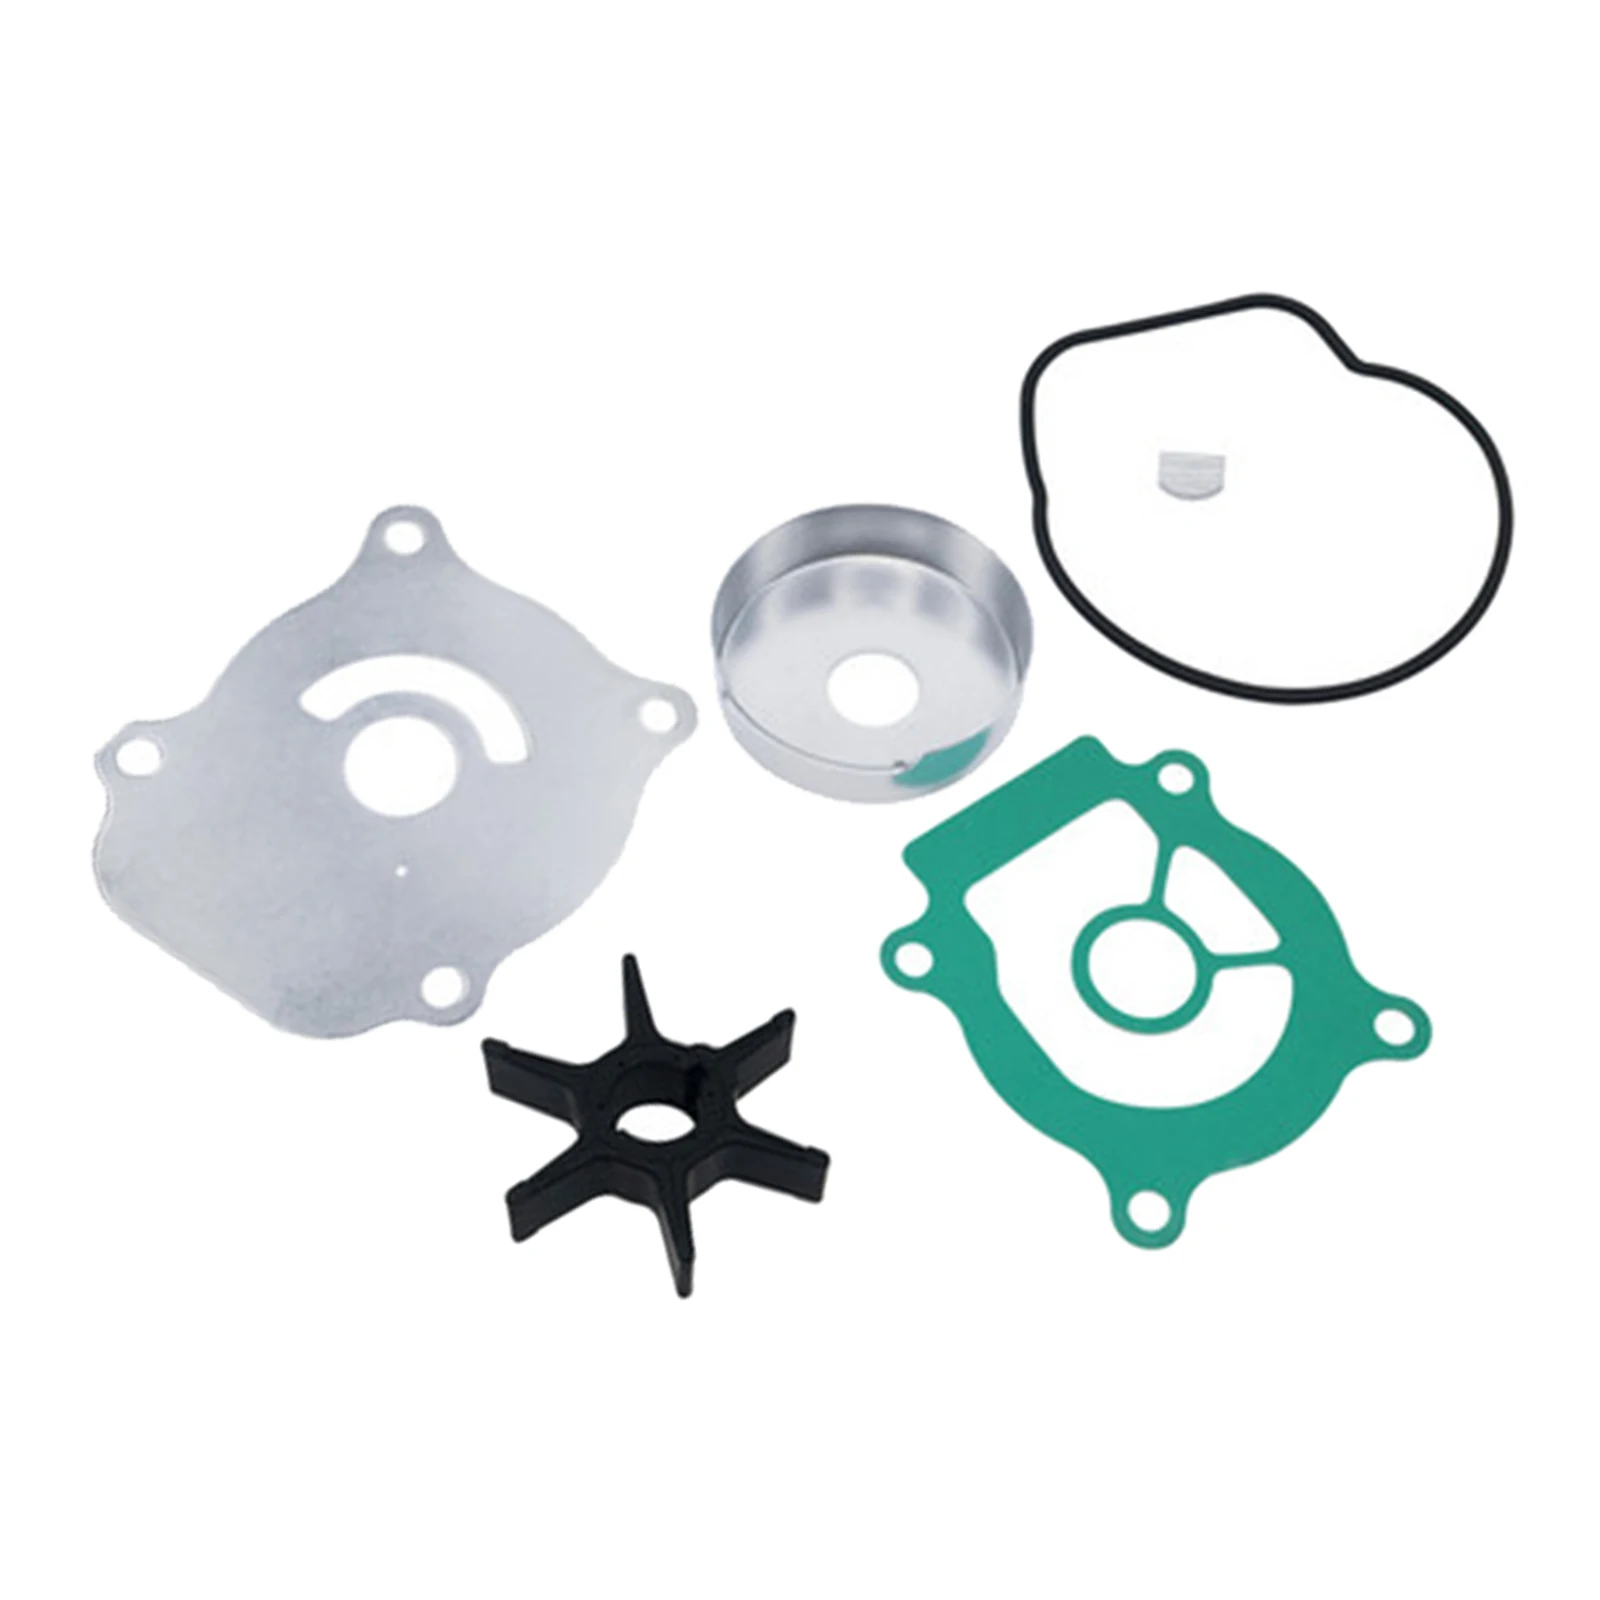 Water Pump Impeller Service Kit 17400-88L00 fits for Suzuki Outboards, Boat Motor Spare Parts High Reliability